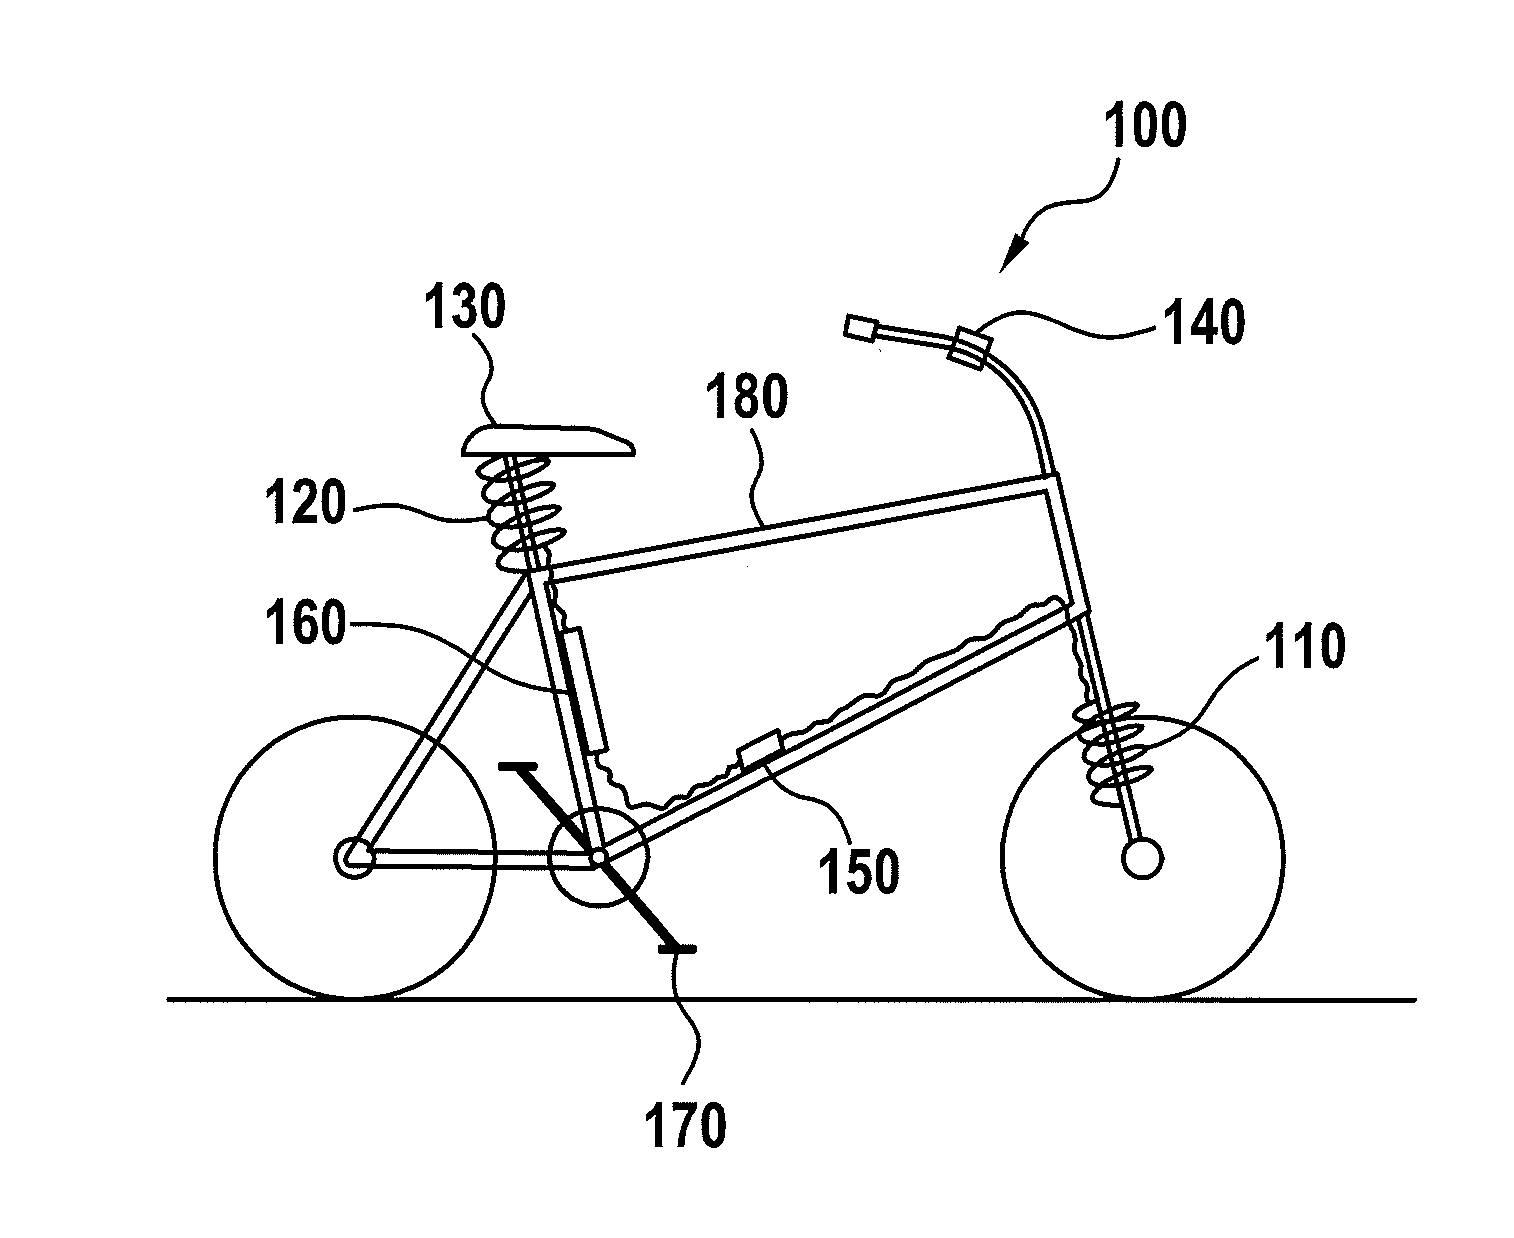 Method and device for controlling the damping of a vehicle that is able to be propelled by the driver